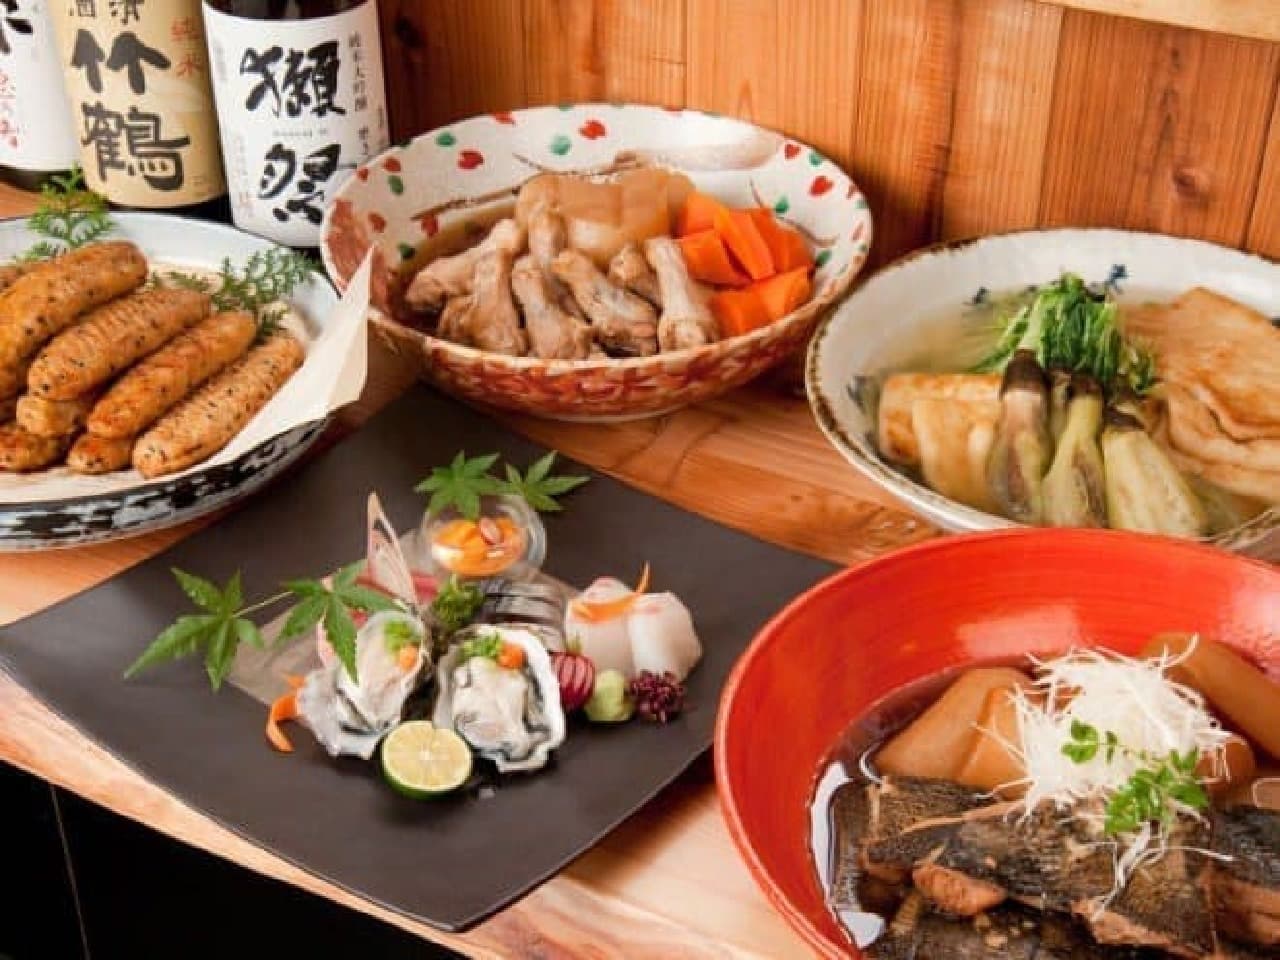 A number of Japanese dishes that are perfect for "premium local sake"